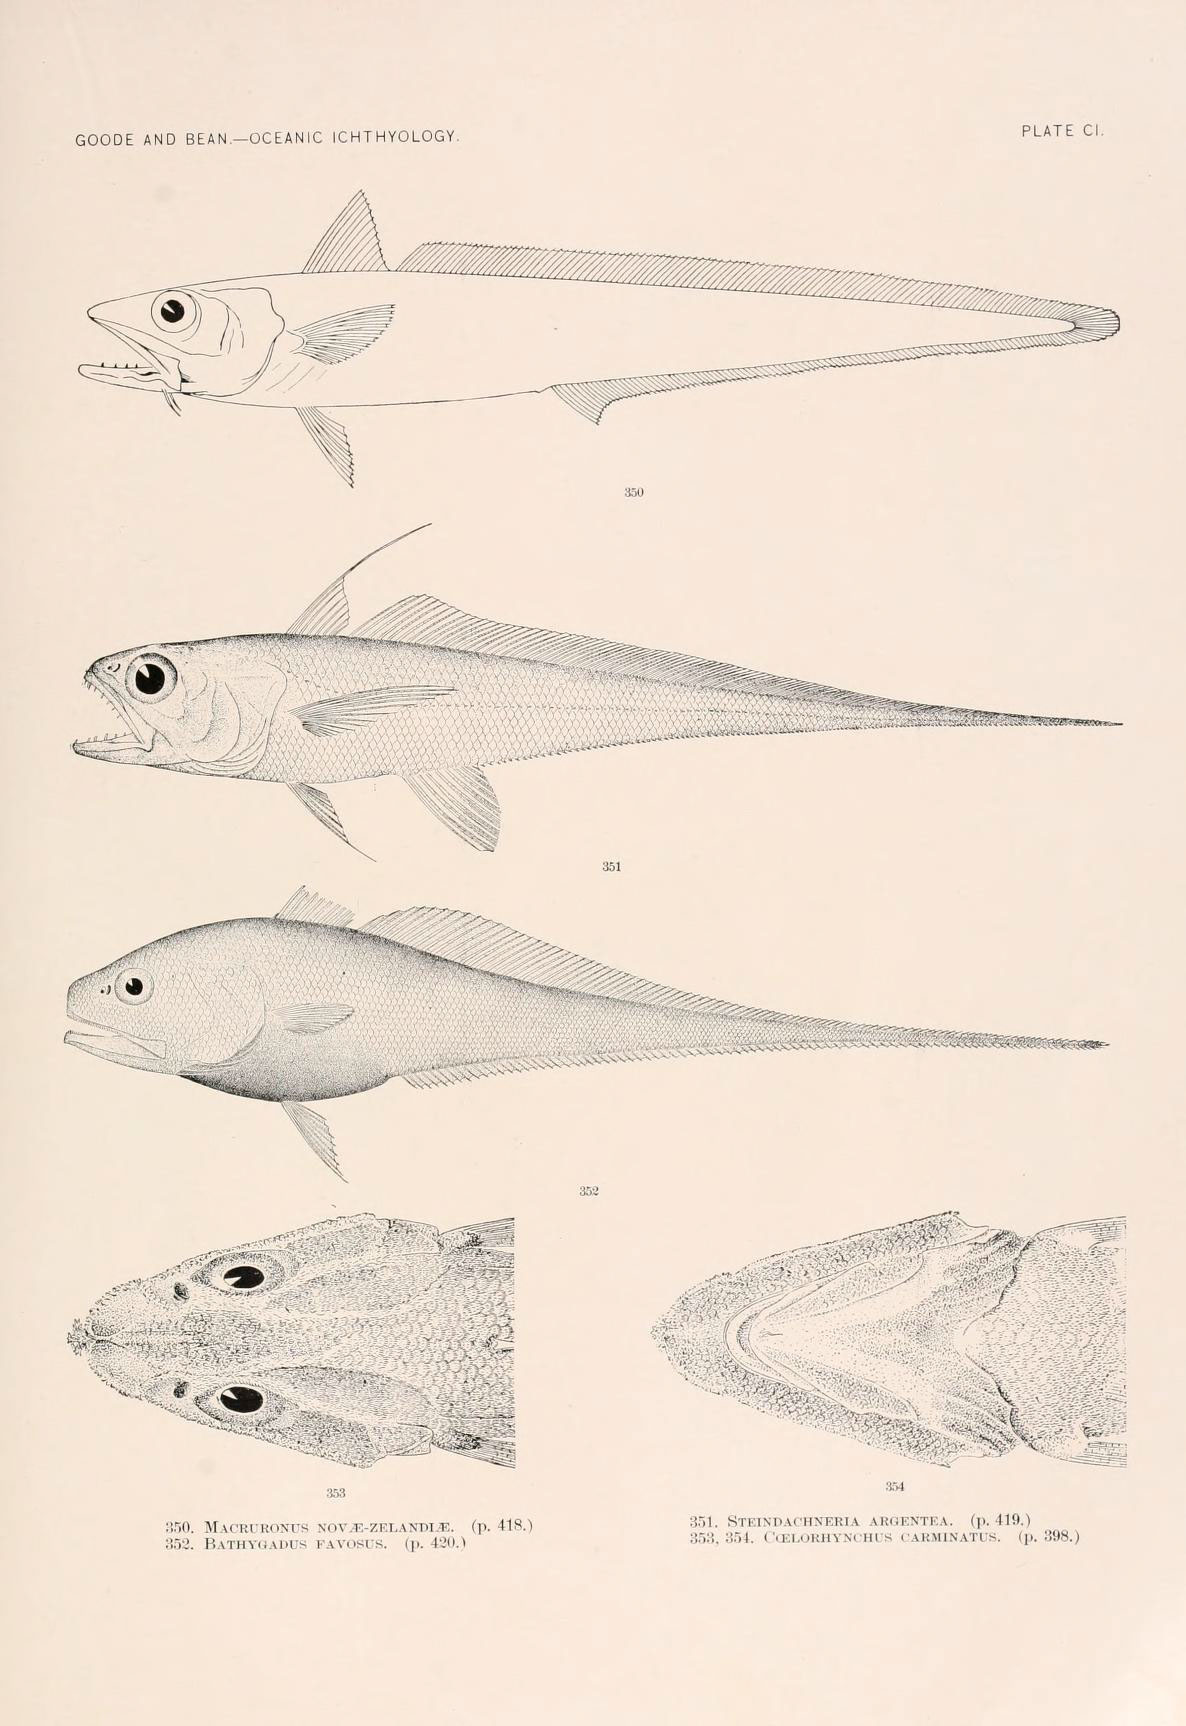 fish from the 1800s book of animal species